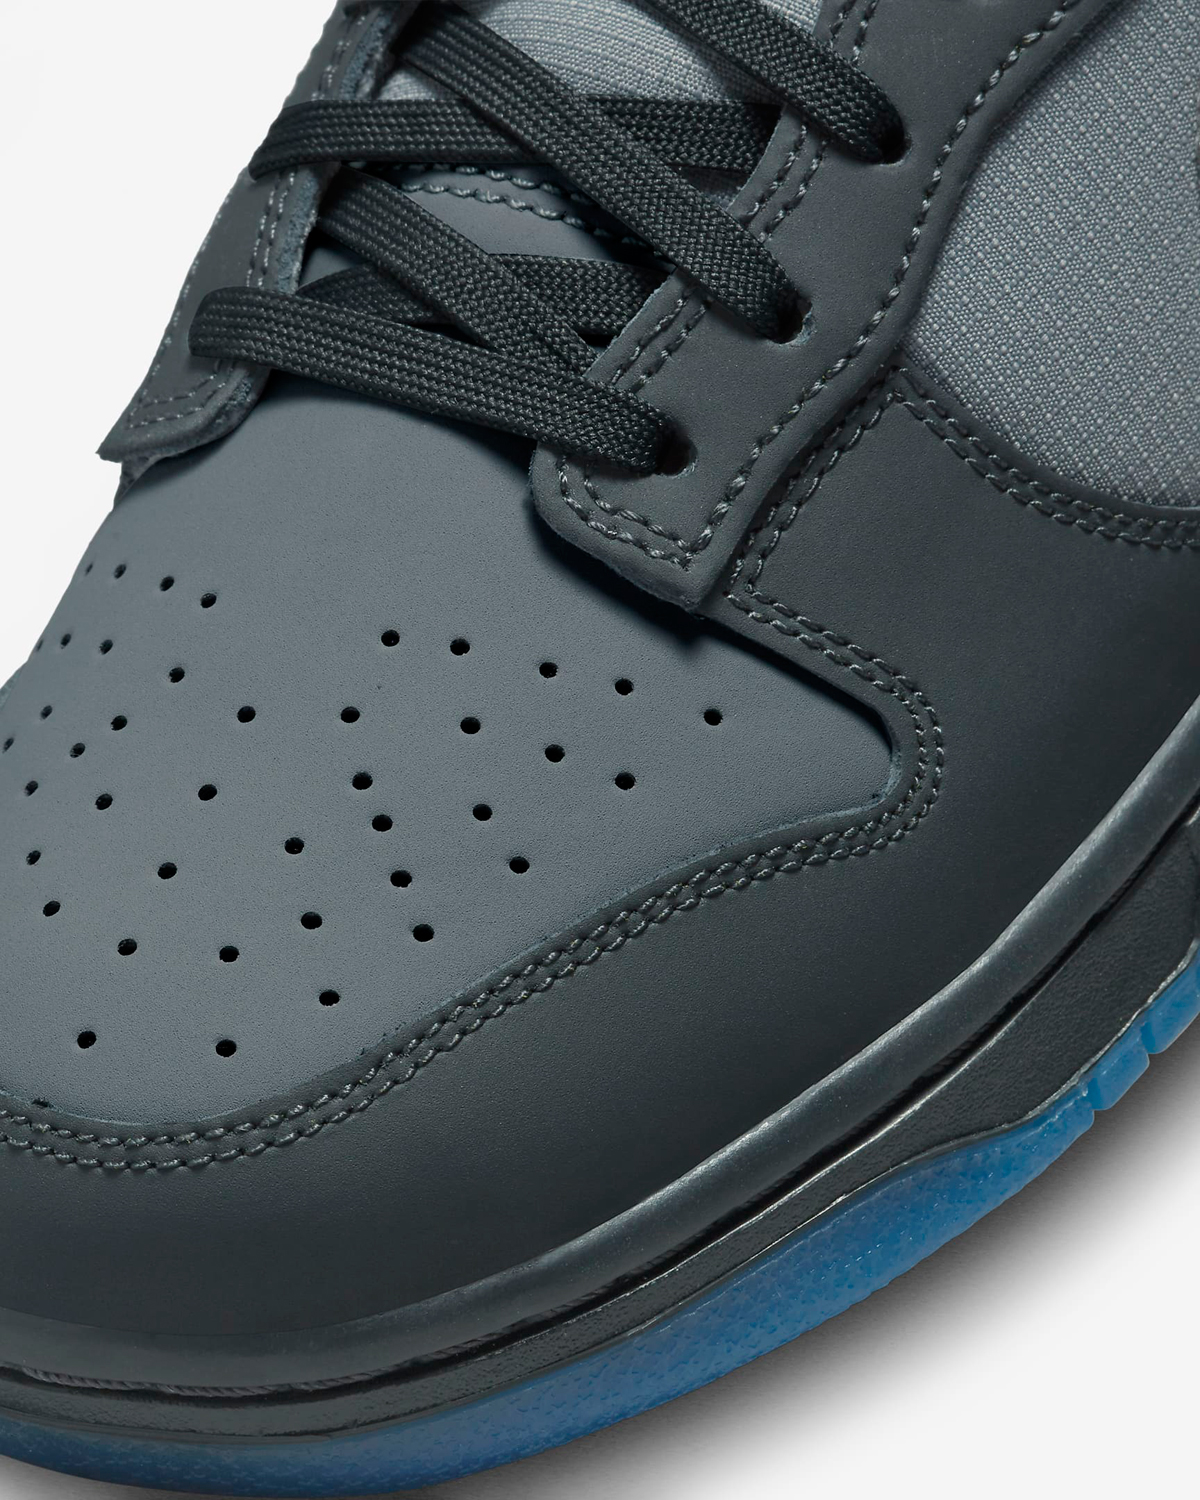 Nike-Dunk-Low-Anthracite-Release-Date-7